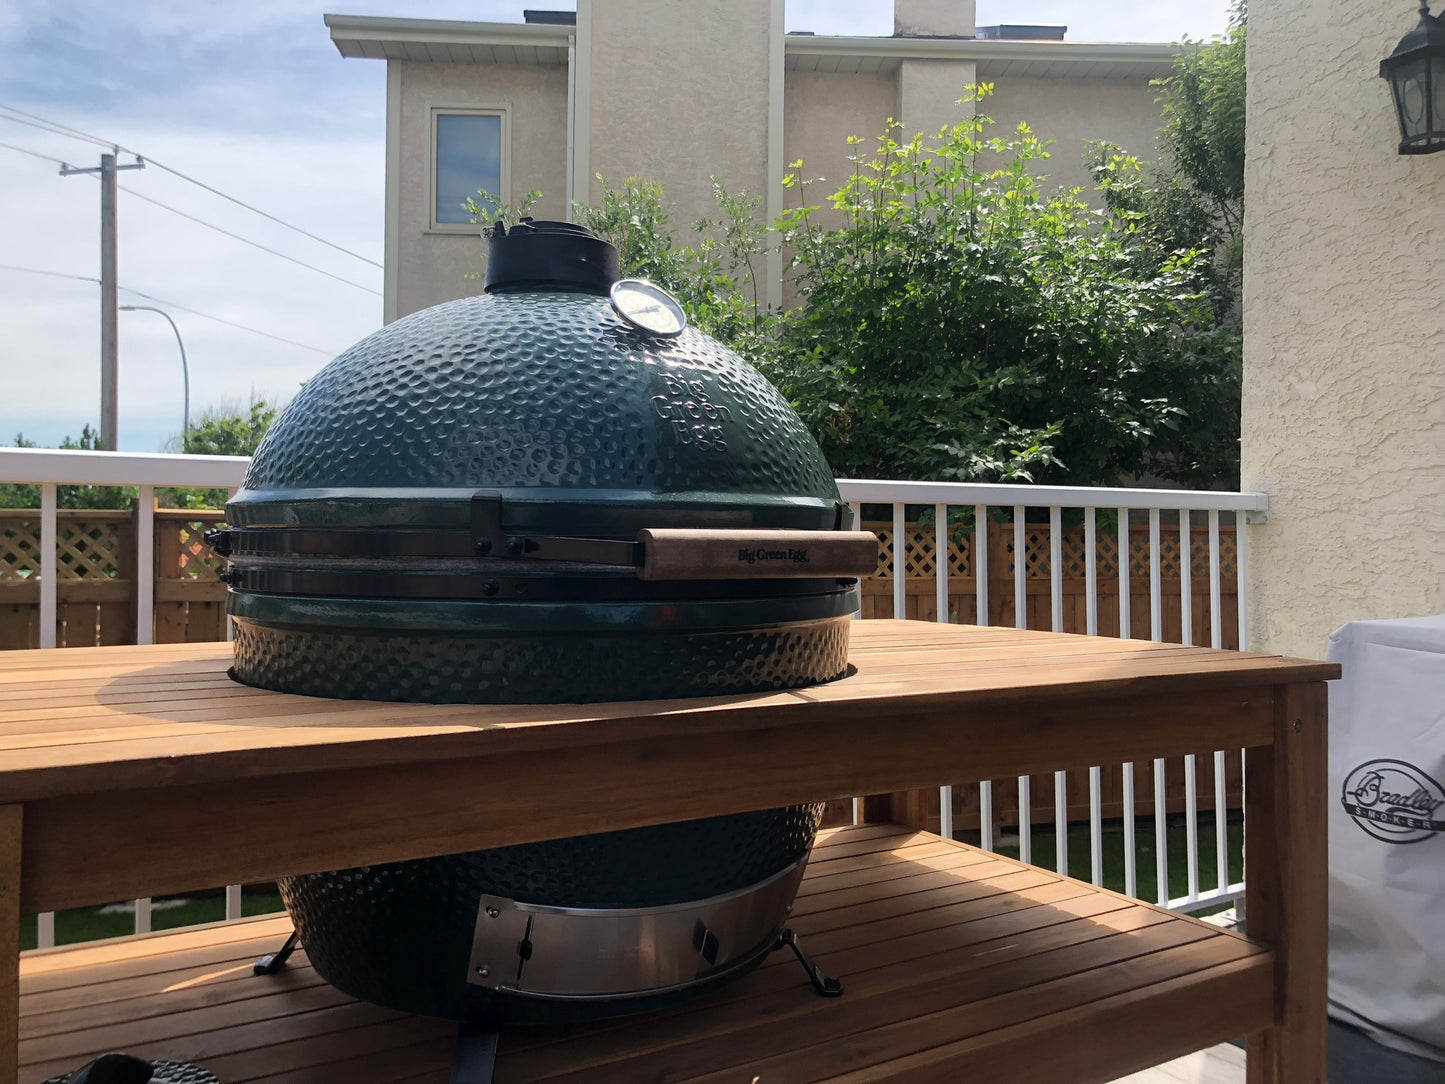 Acacia Wood Table l Barbecues Galore: Burlington, Oakville, Etobicoke & Calgary.  Stop by any of our local stores and we'll get you ready for summer grilling.